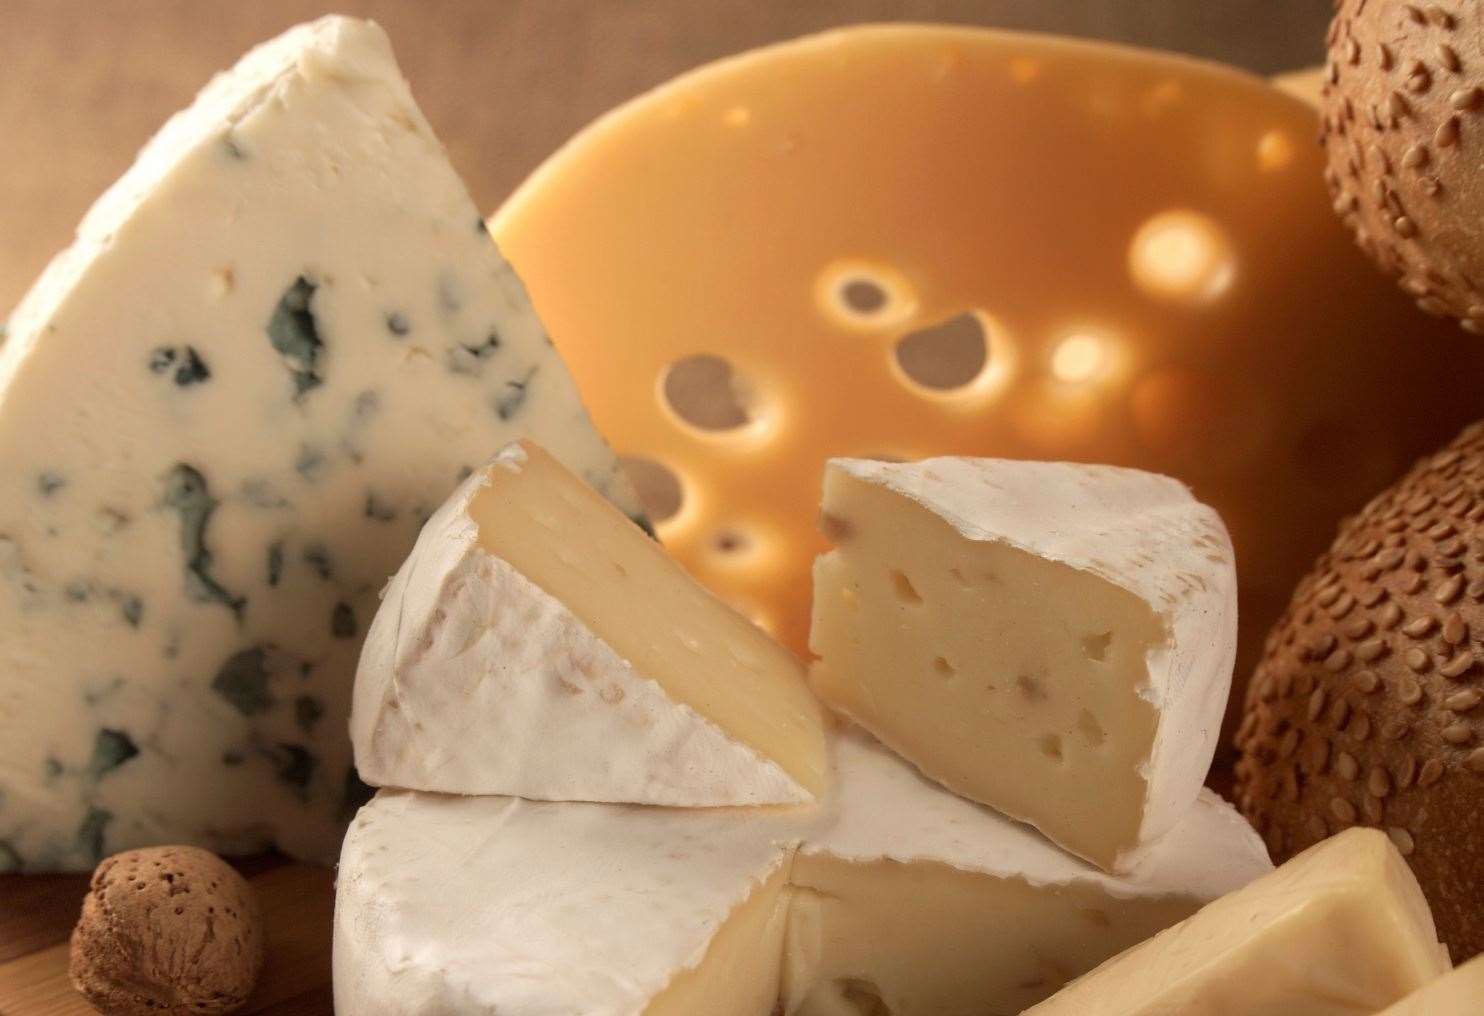 Cheese from our continental cousins will be one of the products subject to checks